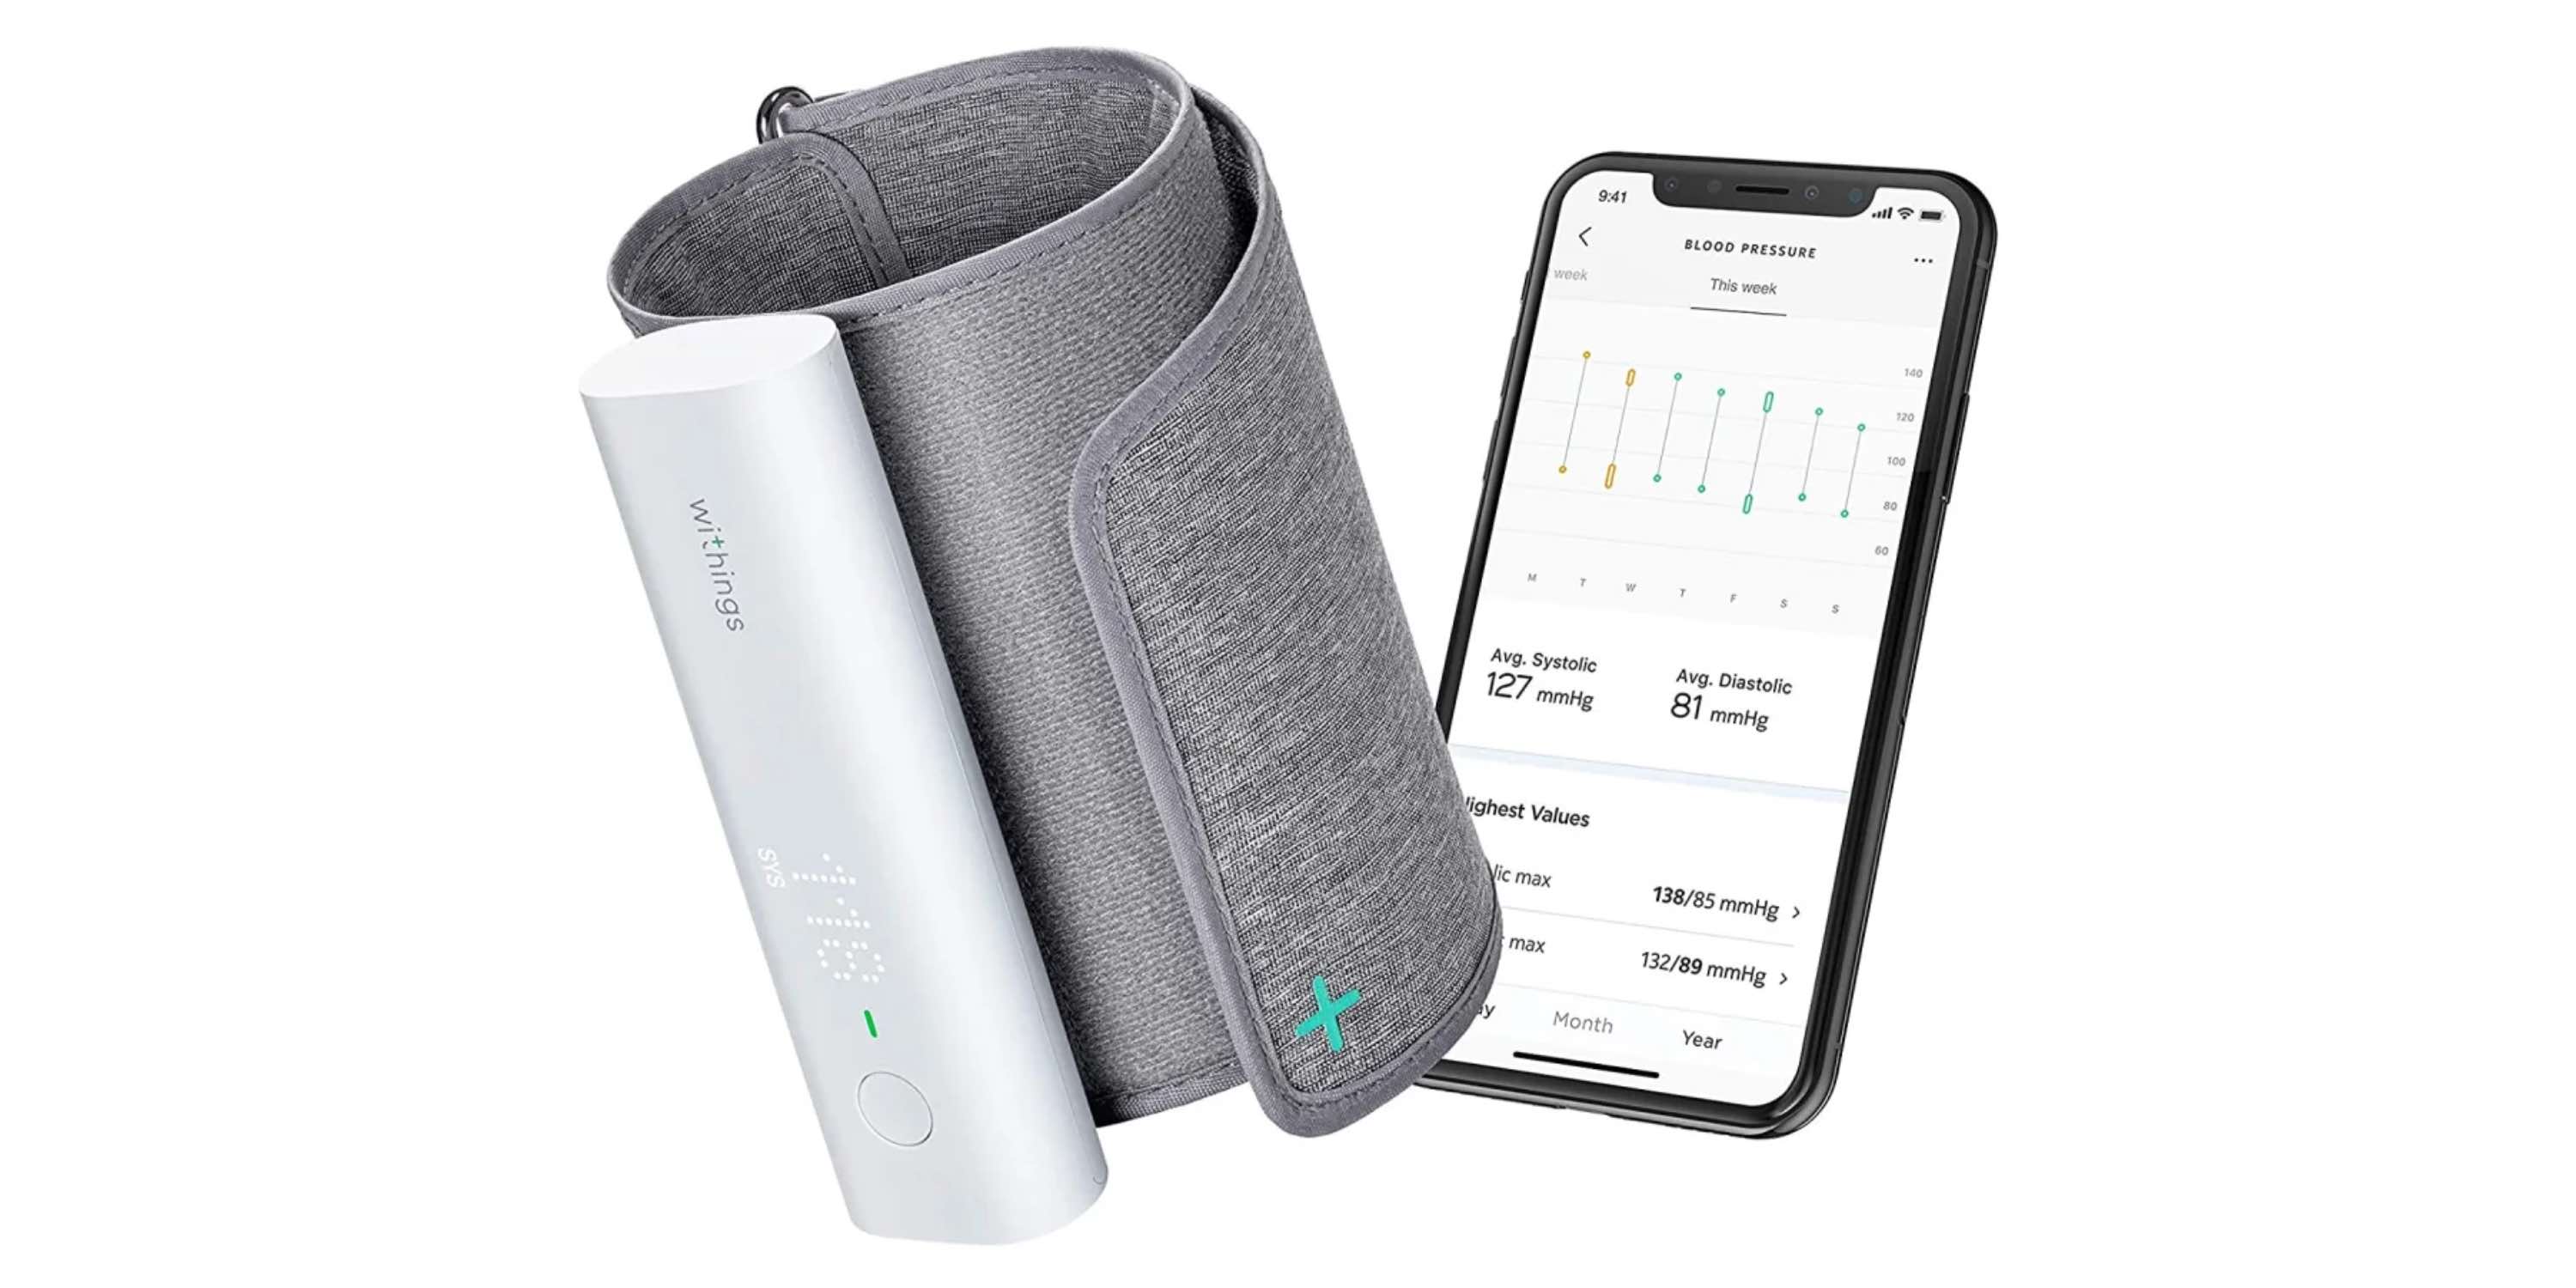 Best smart health/fitness devices gift guide - Withings Blood Pressure Monitor